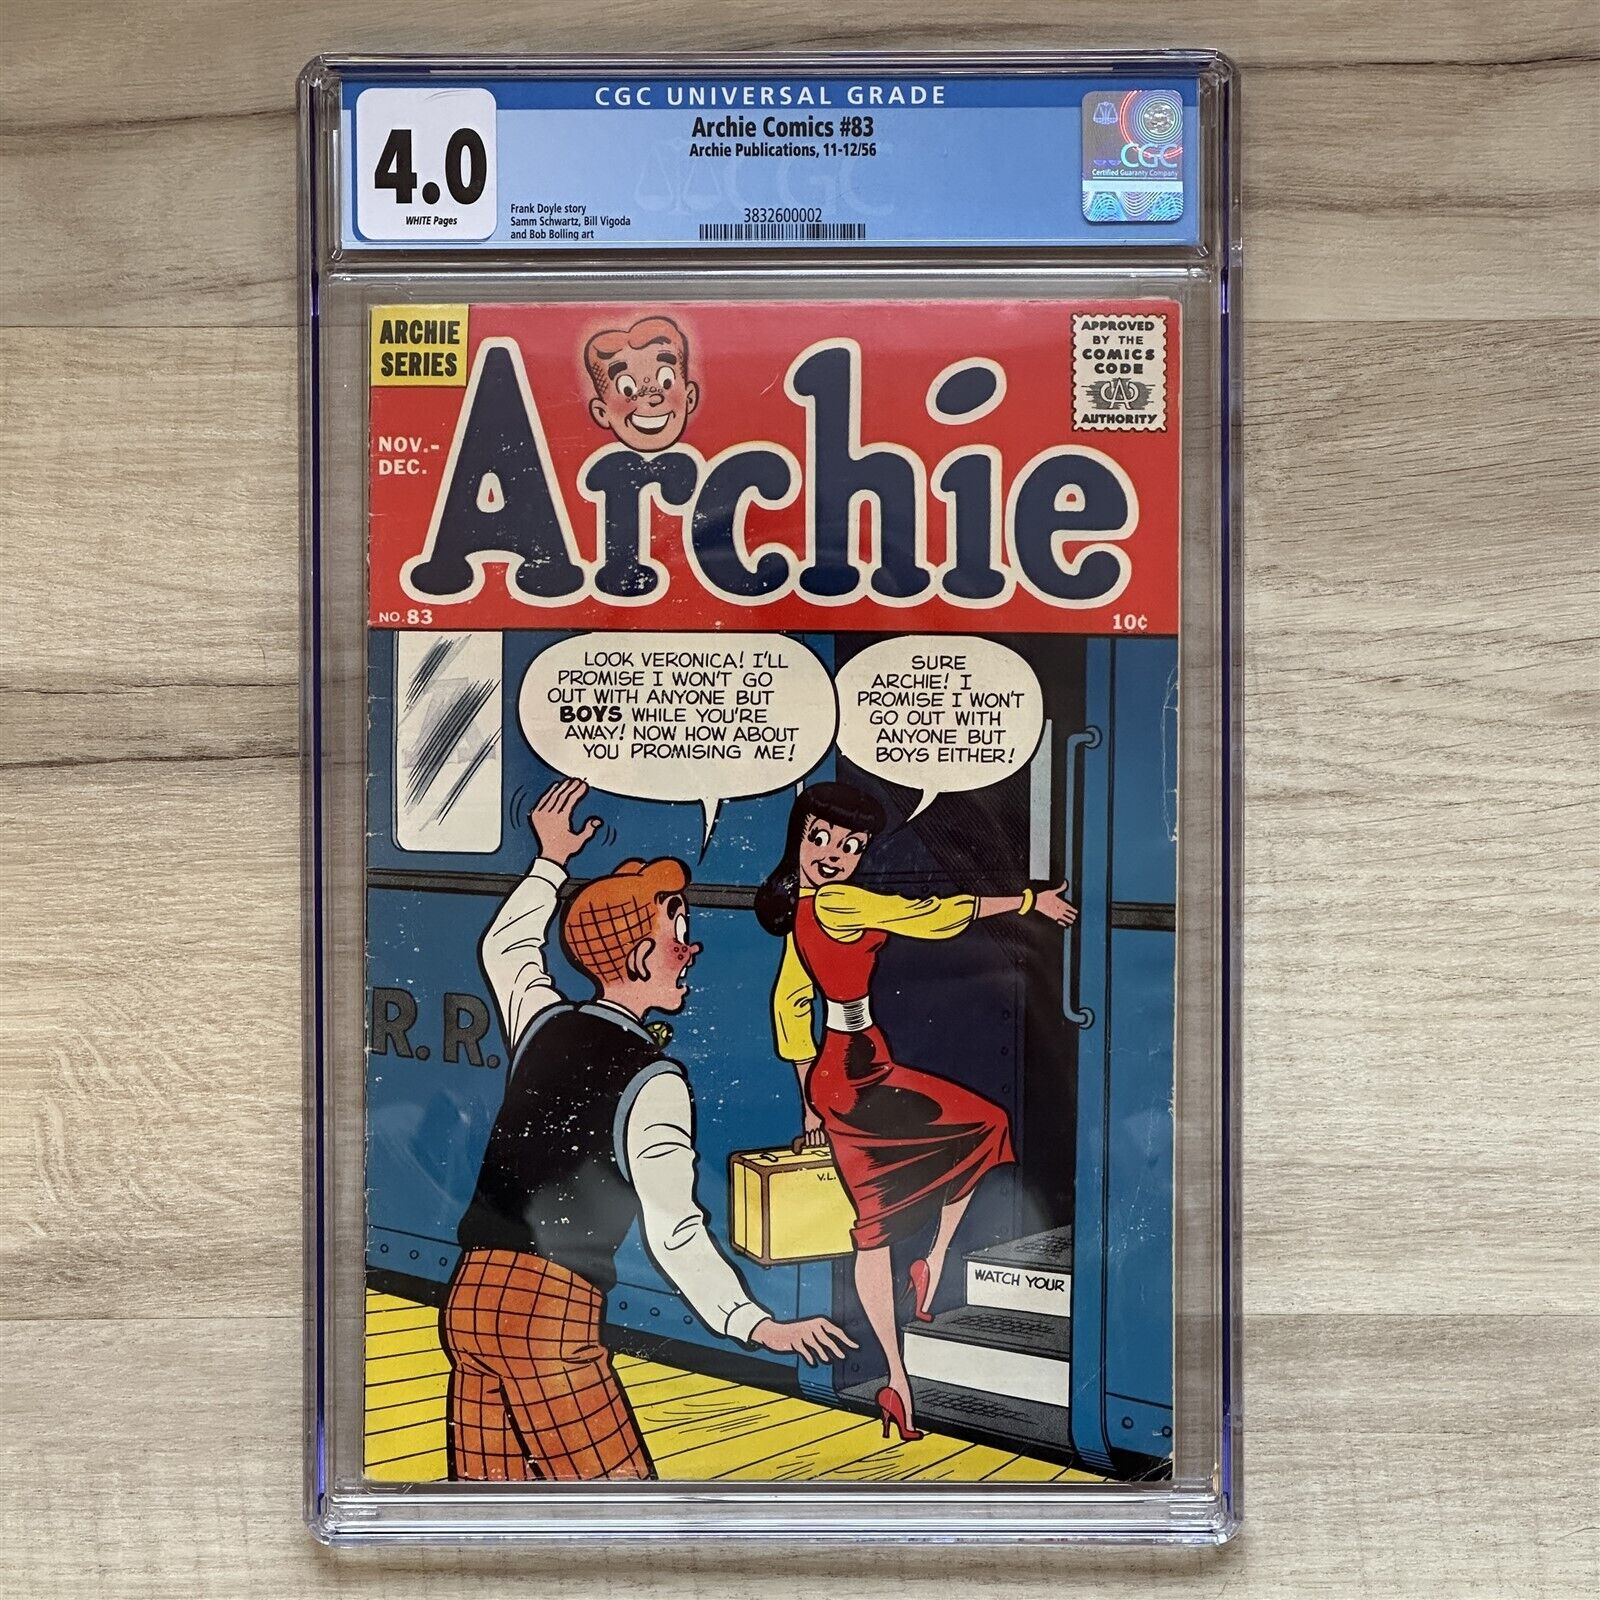 ARCHIE COMICS 83 VOL 1 1956 AMAZING VERONICA GGA CGC 40 VG WITH WHITE PAGES